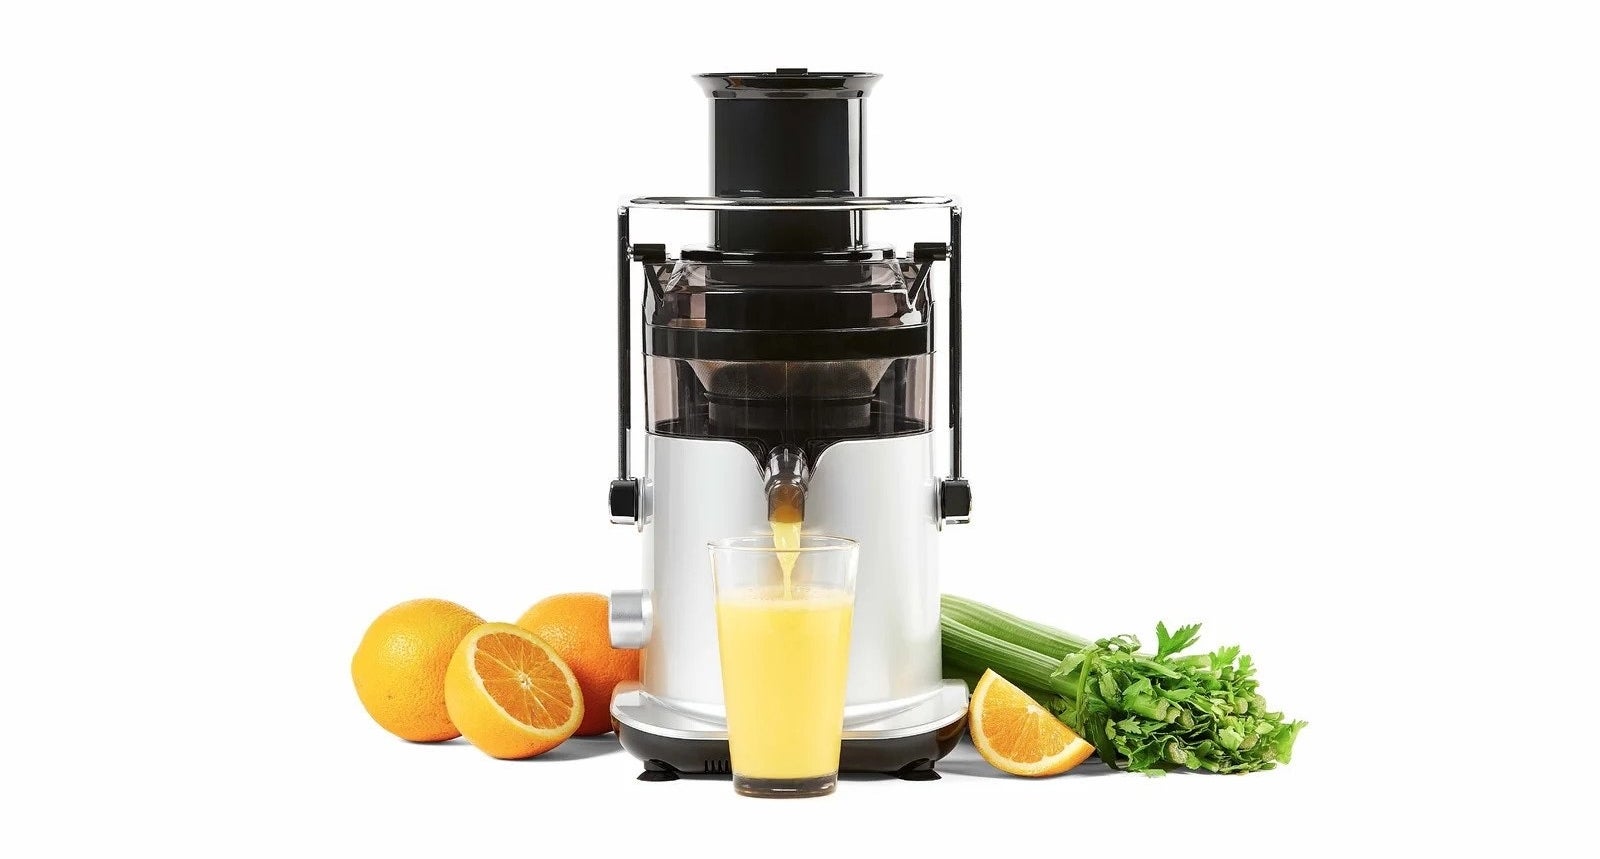 The self-cleaning juicer